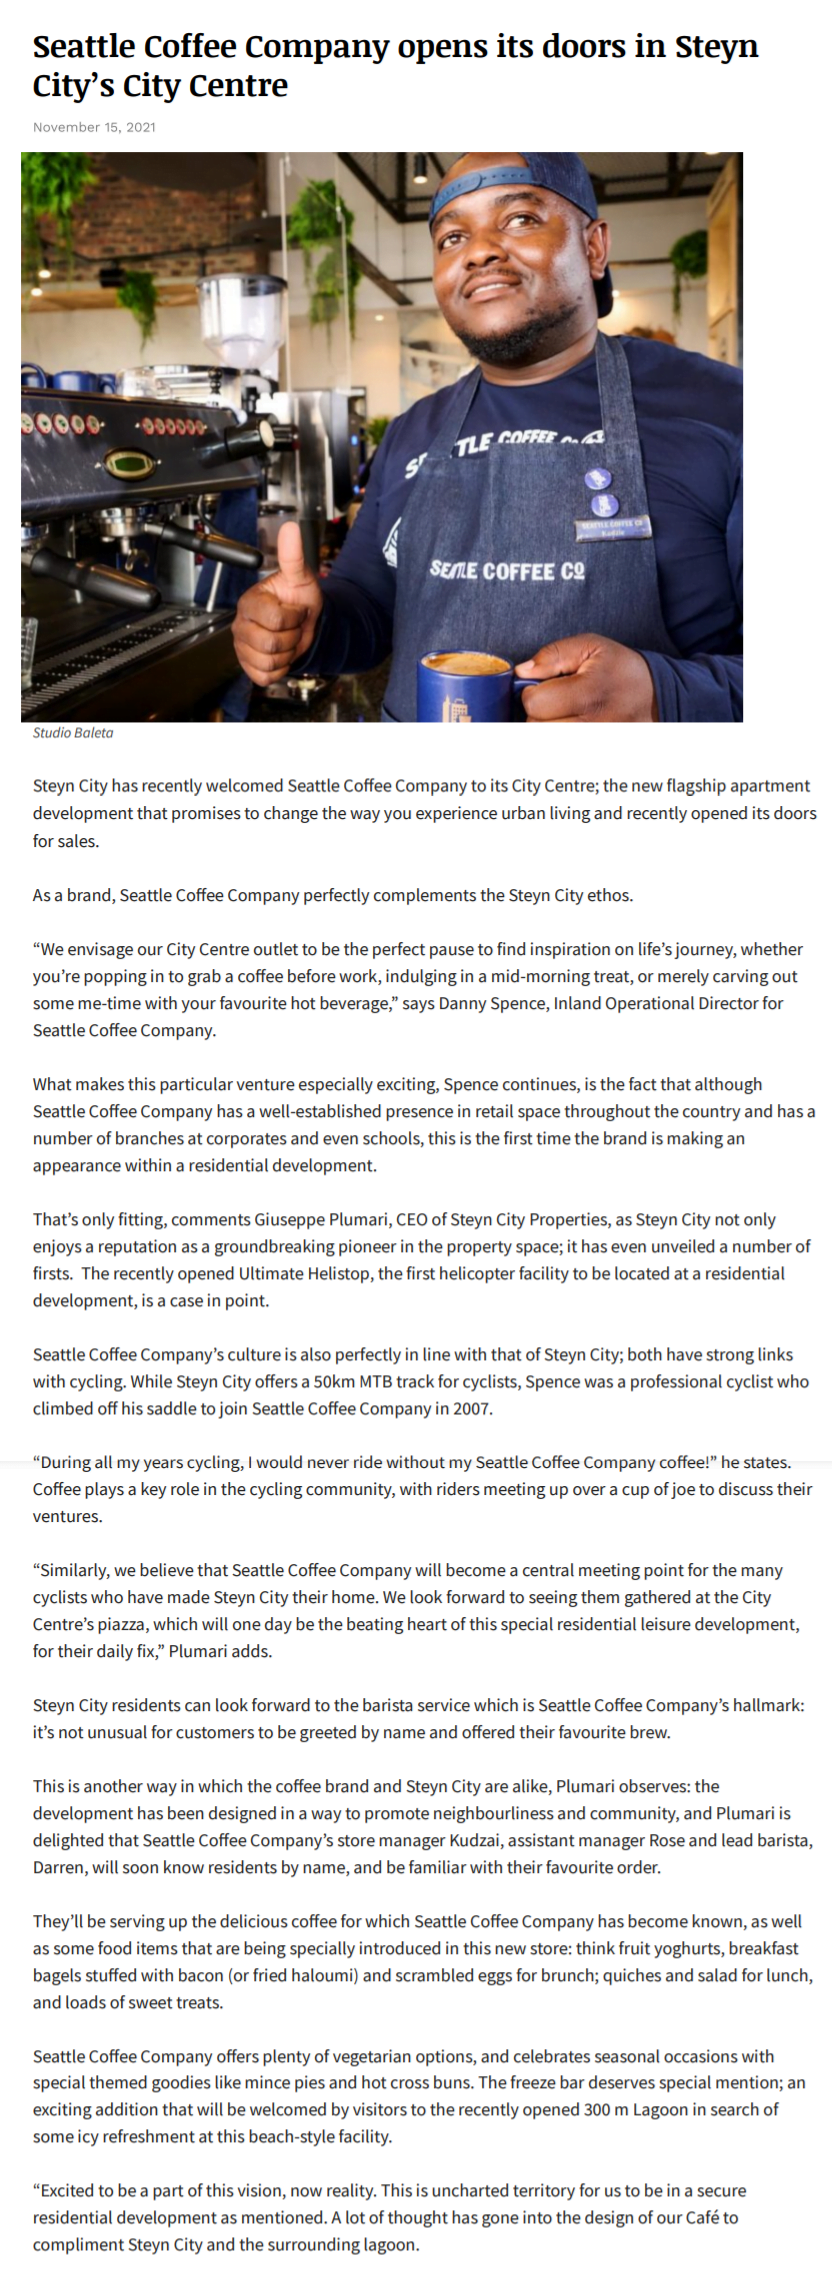 Seattle Coffee Company opens its doors in Steyn City’s City Centre